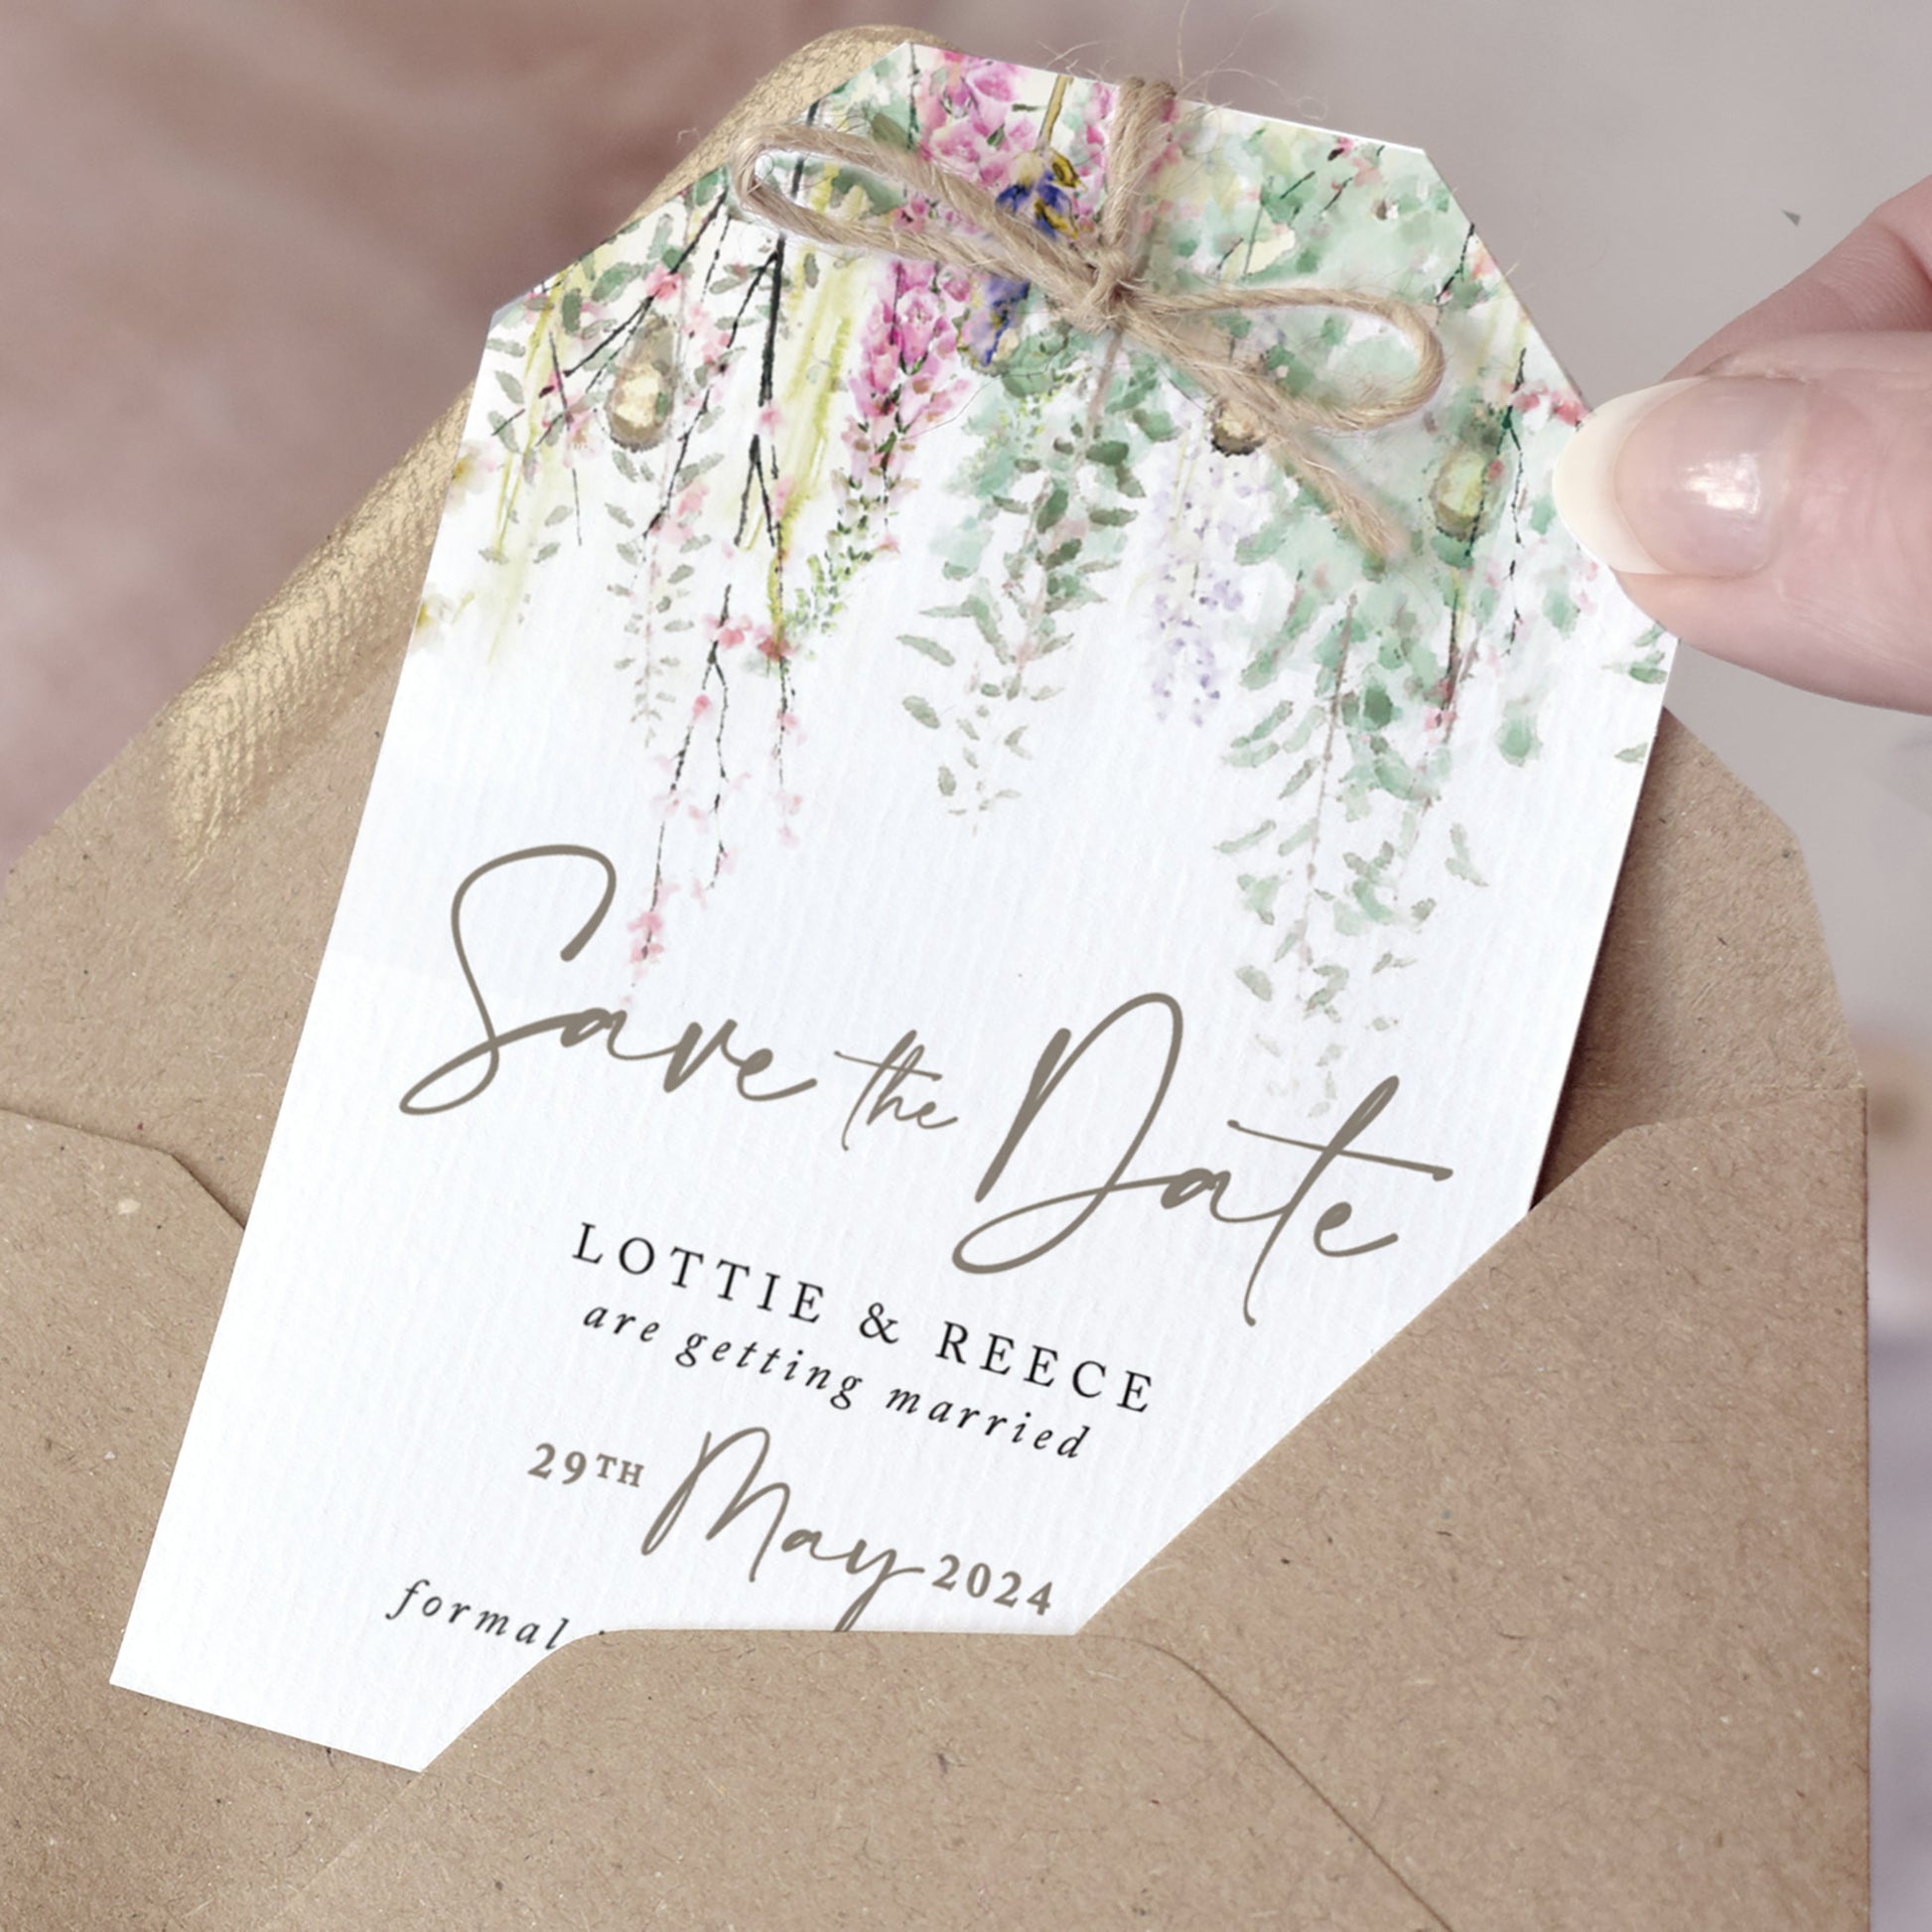 Rustic Save the Date cards cut into a tag shape and finished with a jute twine bow. The design features sage green foliage with whimsical flowrers and string lights. The typography is simple and modern with caligraphy style accents.